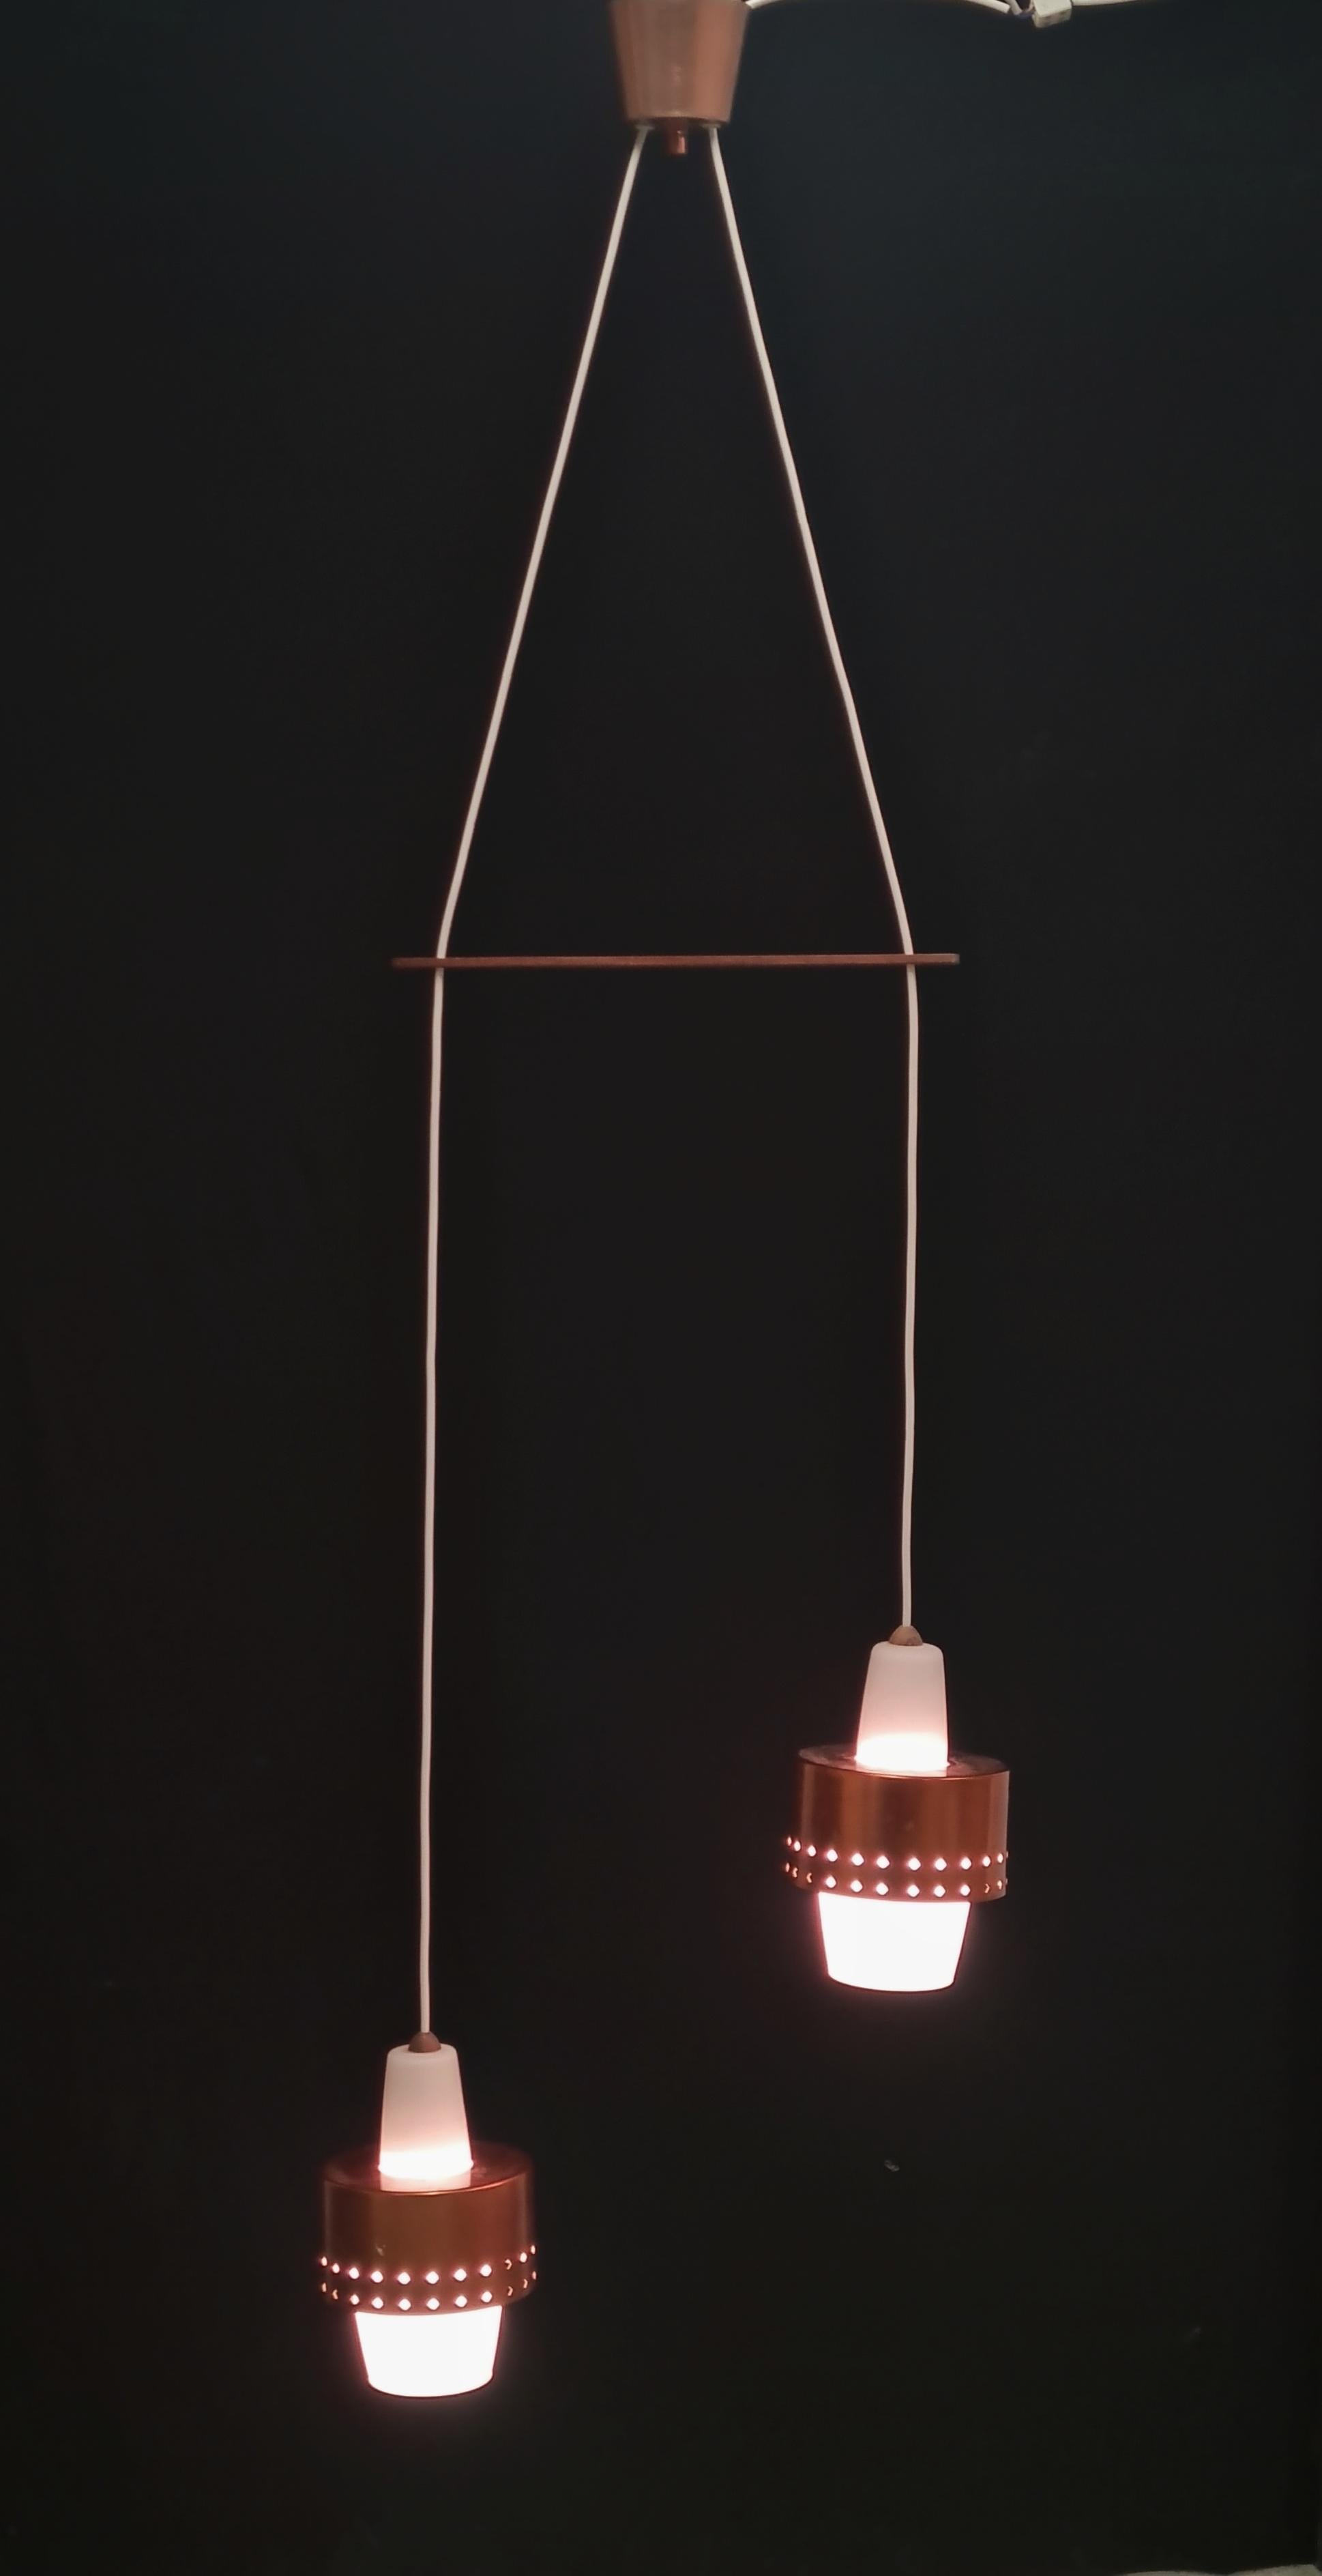 A lovely and adjustable vintage ceiling lamp by Presenta designed for Idman Oy in the 1960s. The model was sold by Idman as model K2-117/2 or /3 with three lamps. The freely hanging lights' height is adjustable and the measurement above is at their